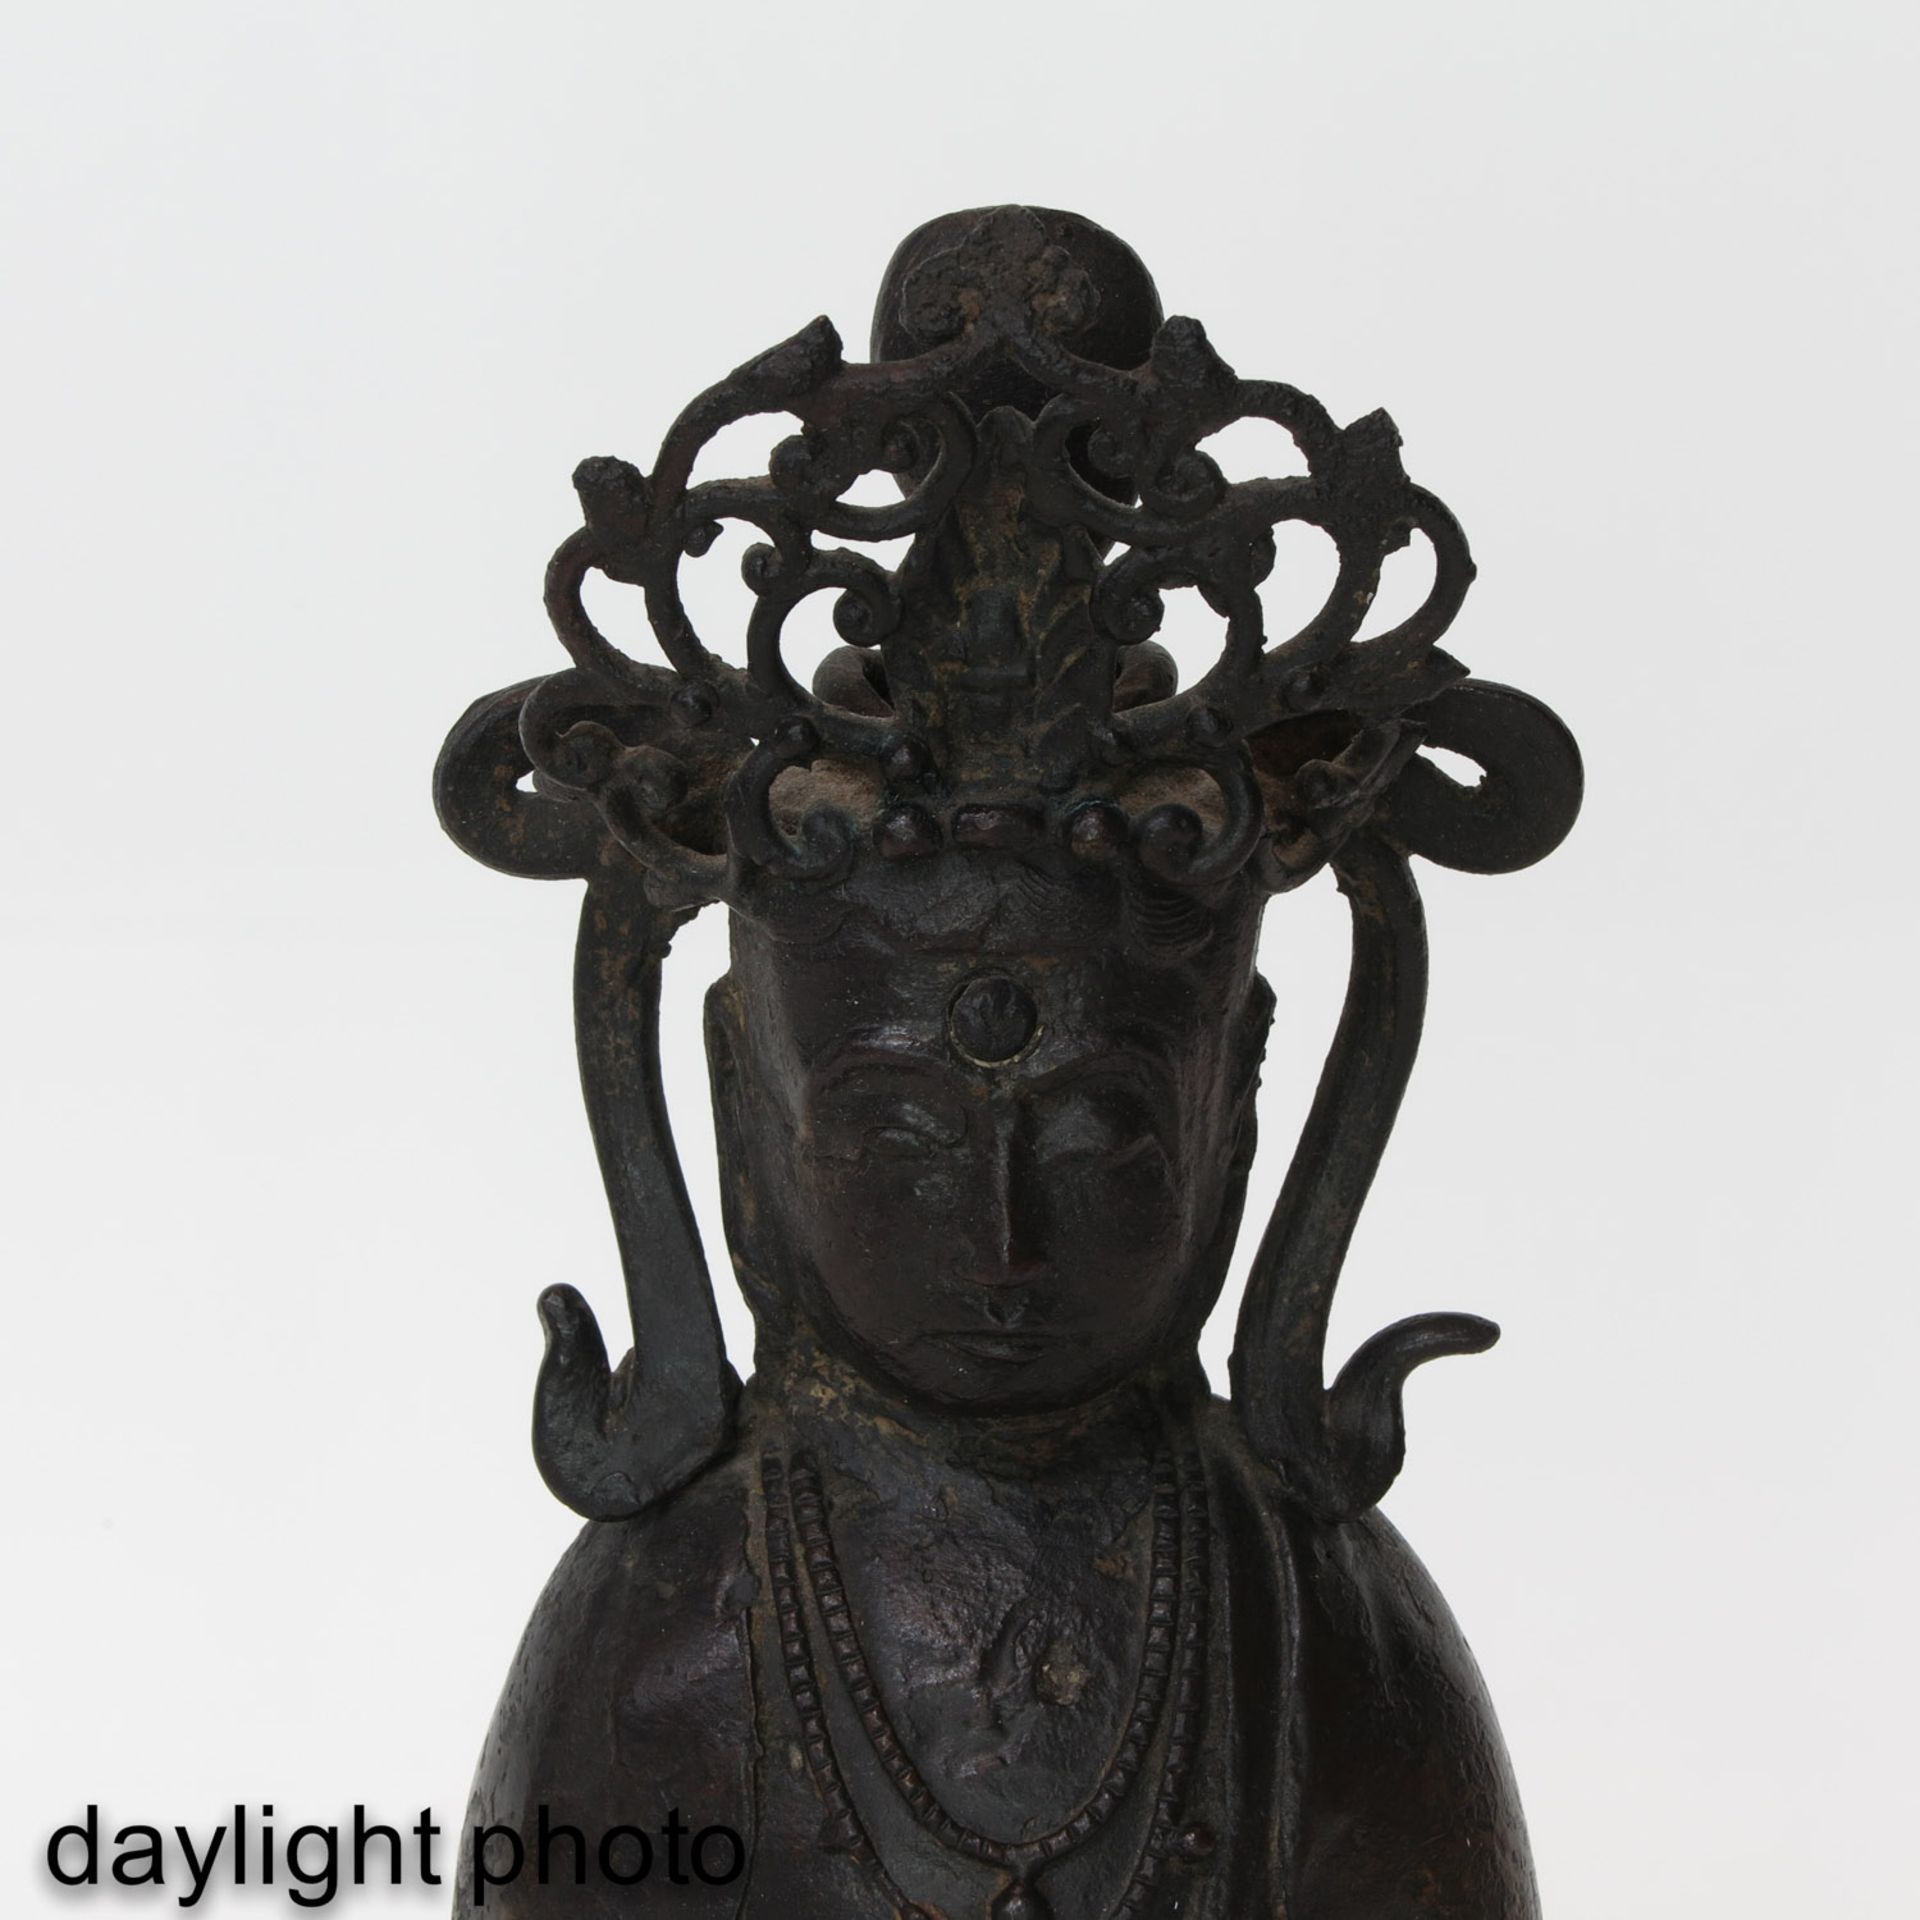 A Quanyin Sculpture on Wood Frame - Image 9 of 9